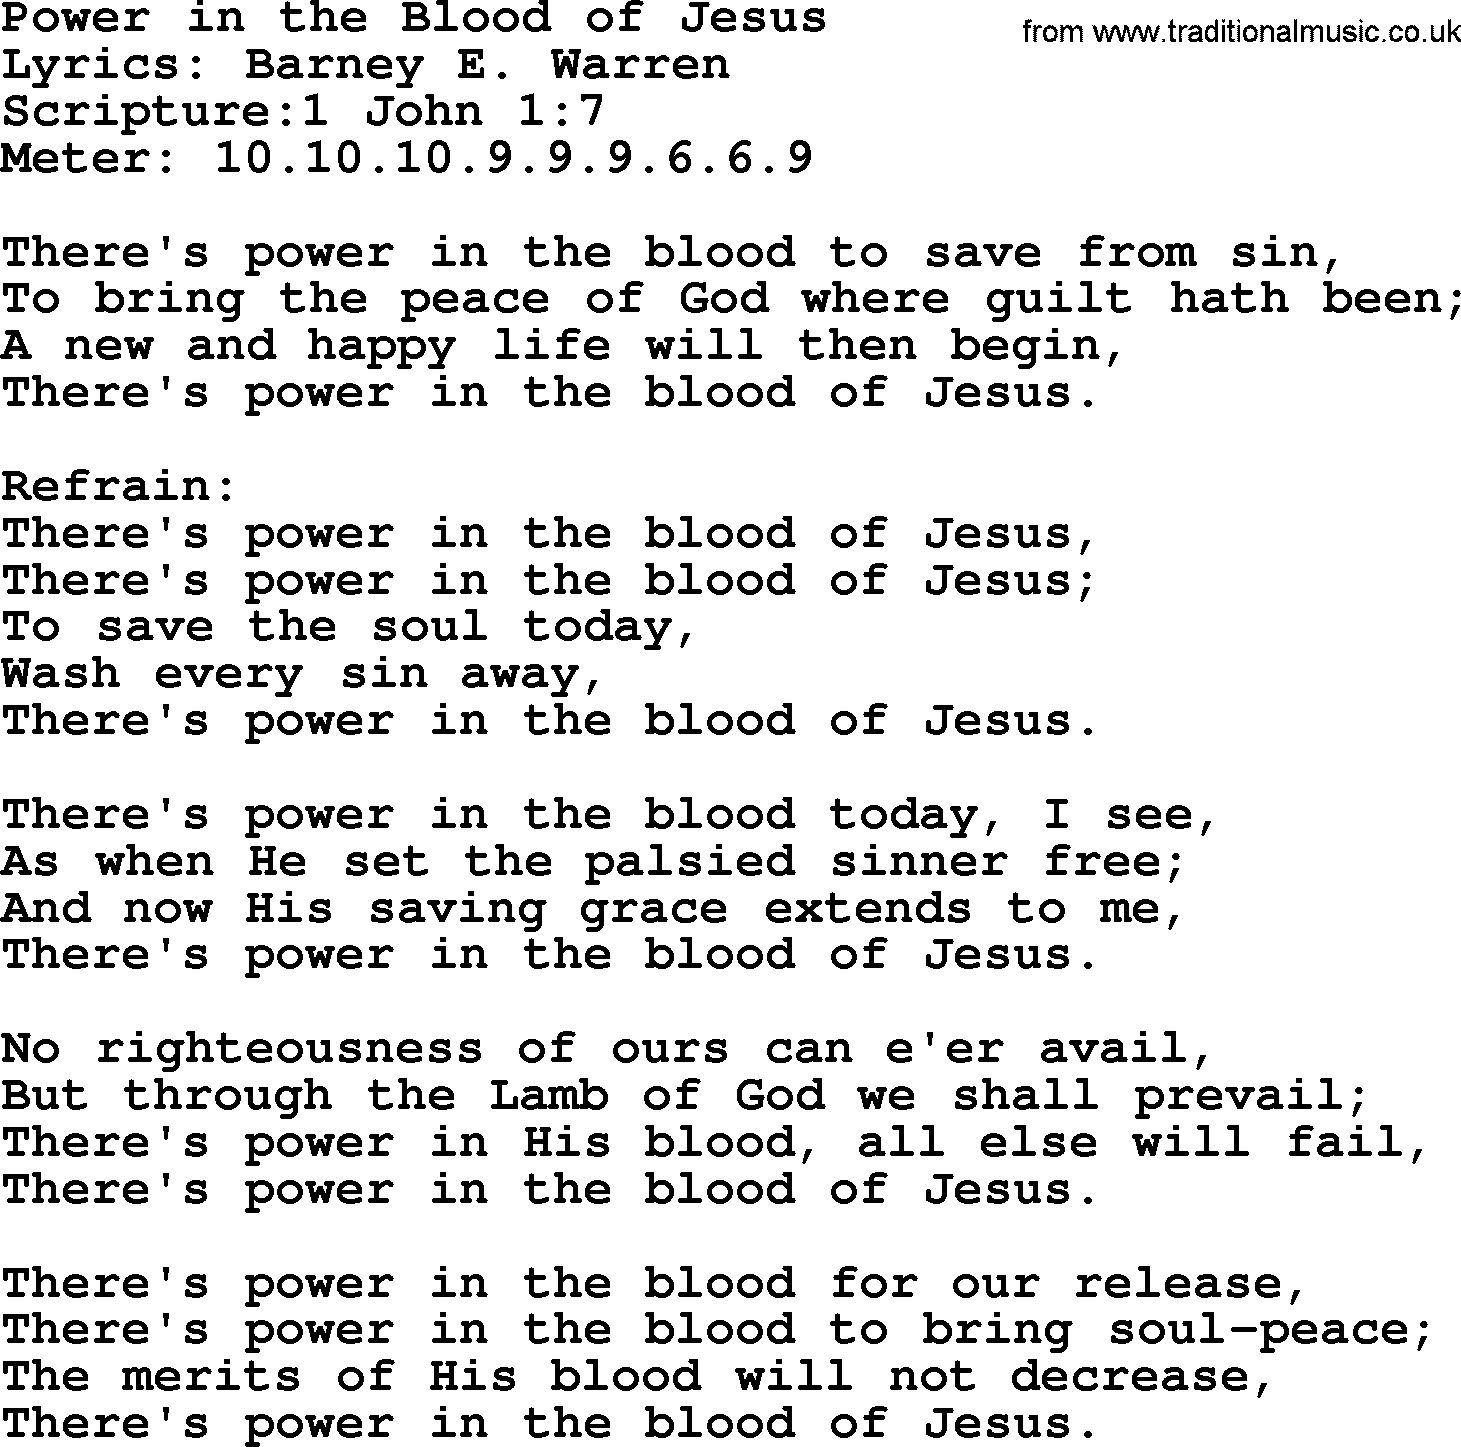 A collection of 500+ most sung Christian church hymns and songs, title: Power In The Blood Of Jesus, lyrics, PPTX and PDF